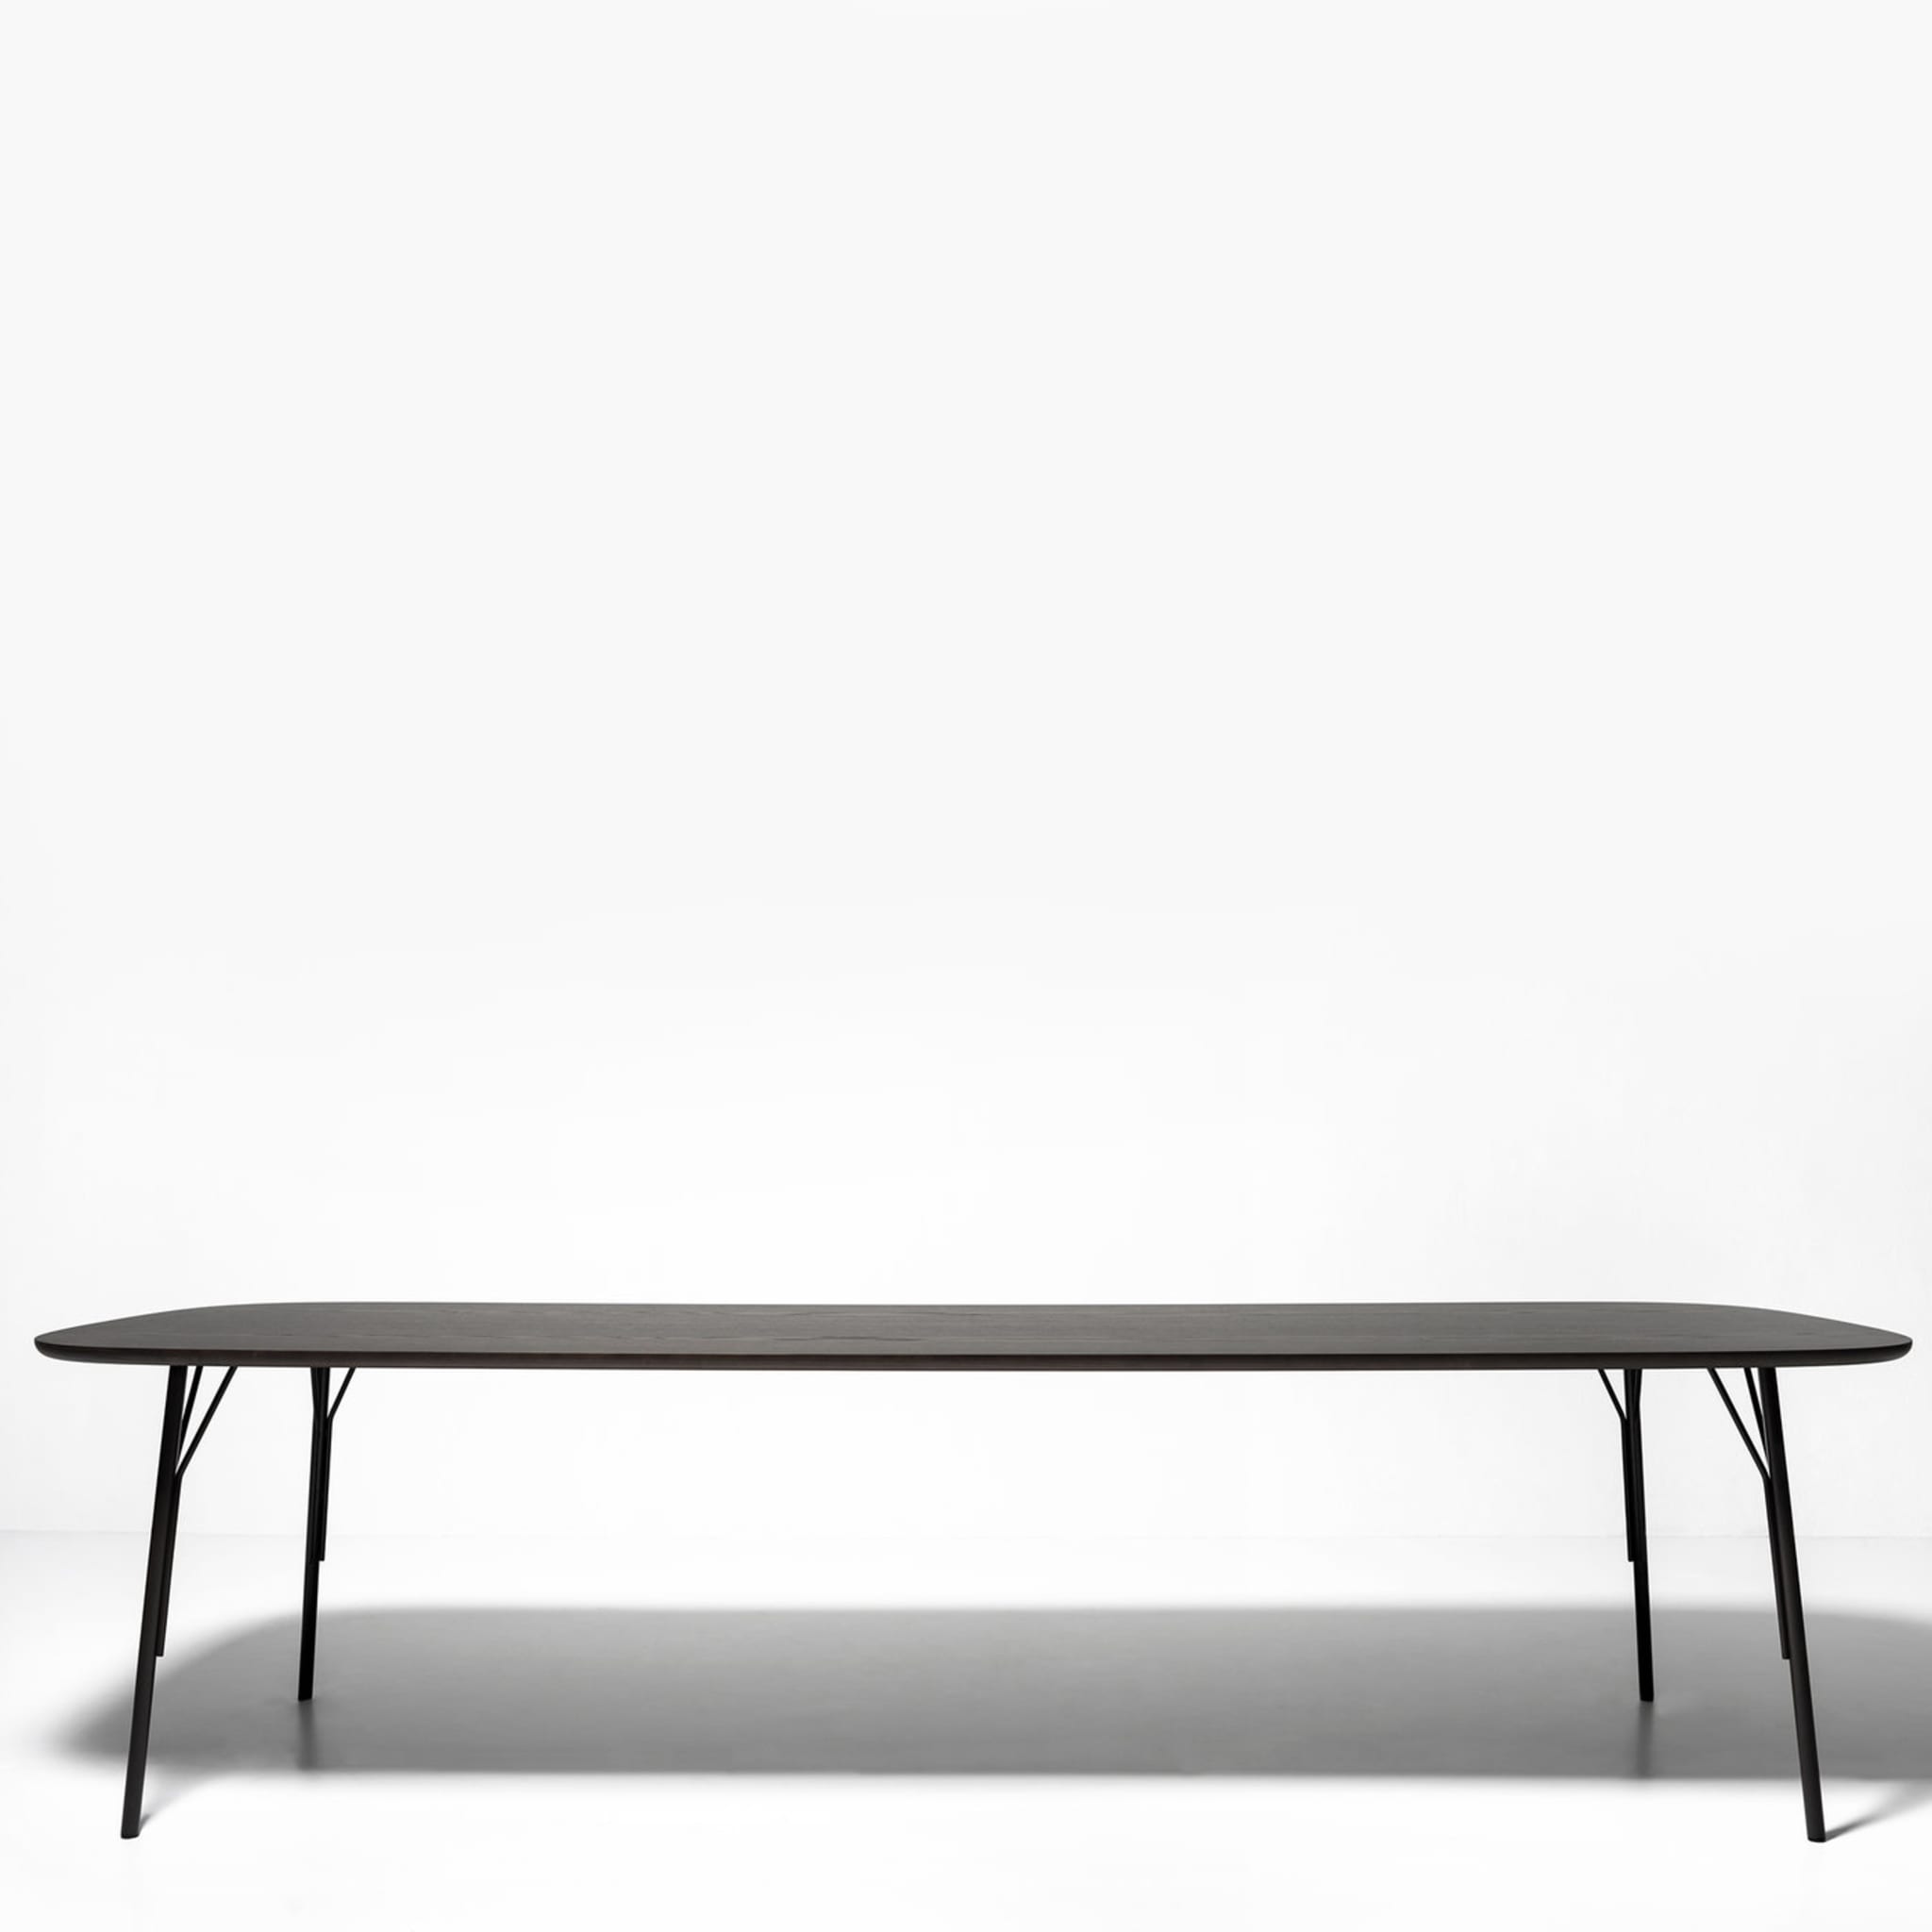 Kelly T Wenge Table by Claesson Koivisto Rune - Alternative view 1